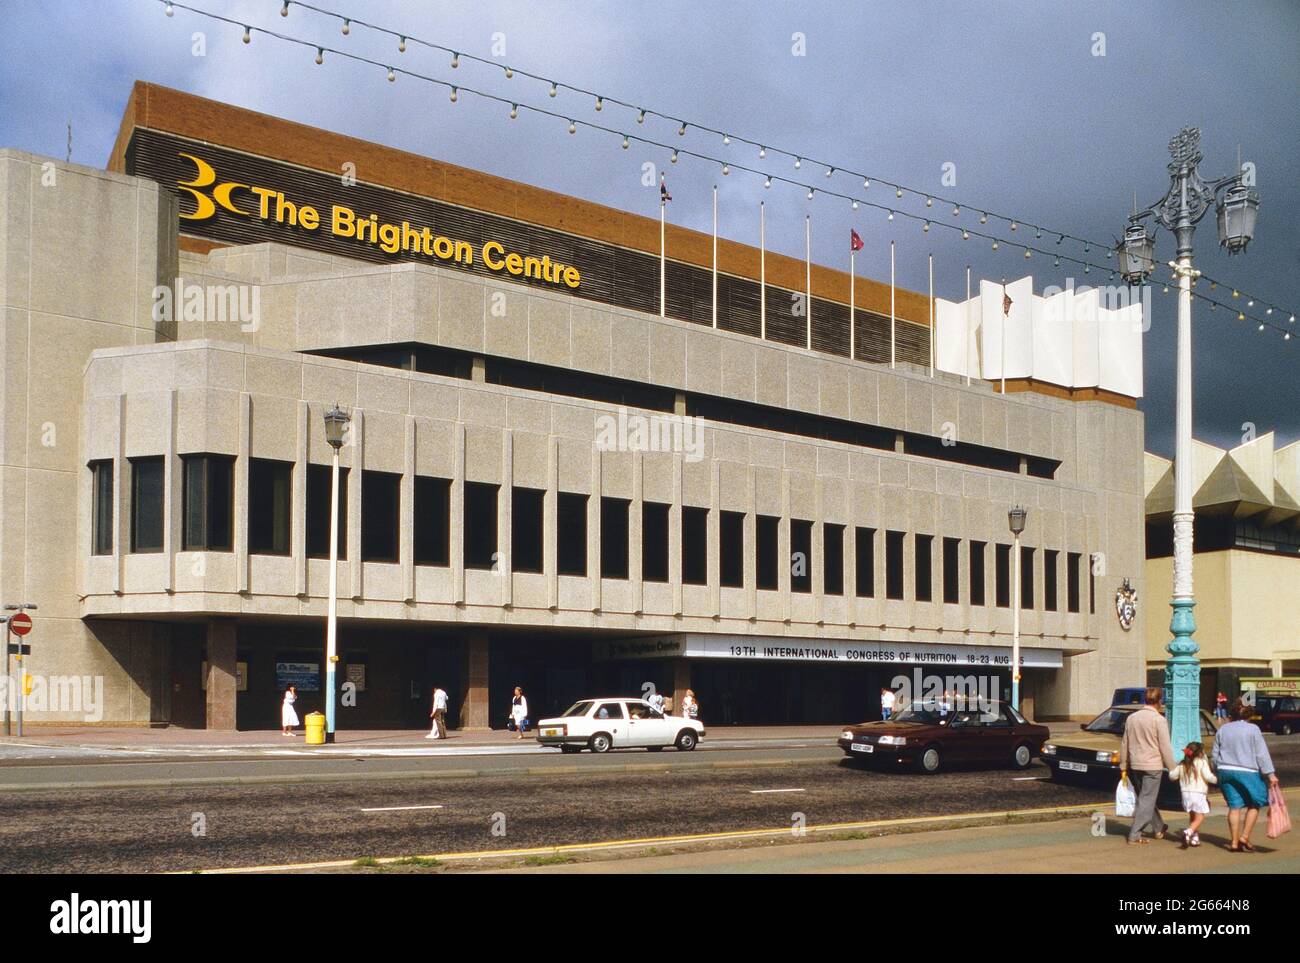 International Congress of Nutrition held at The Brighton Centre, Brighton, East Sussex, England, UK. Aug 18-23, 1985 Stock Photo